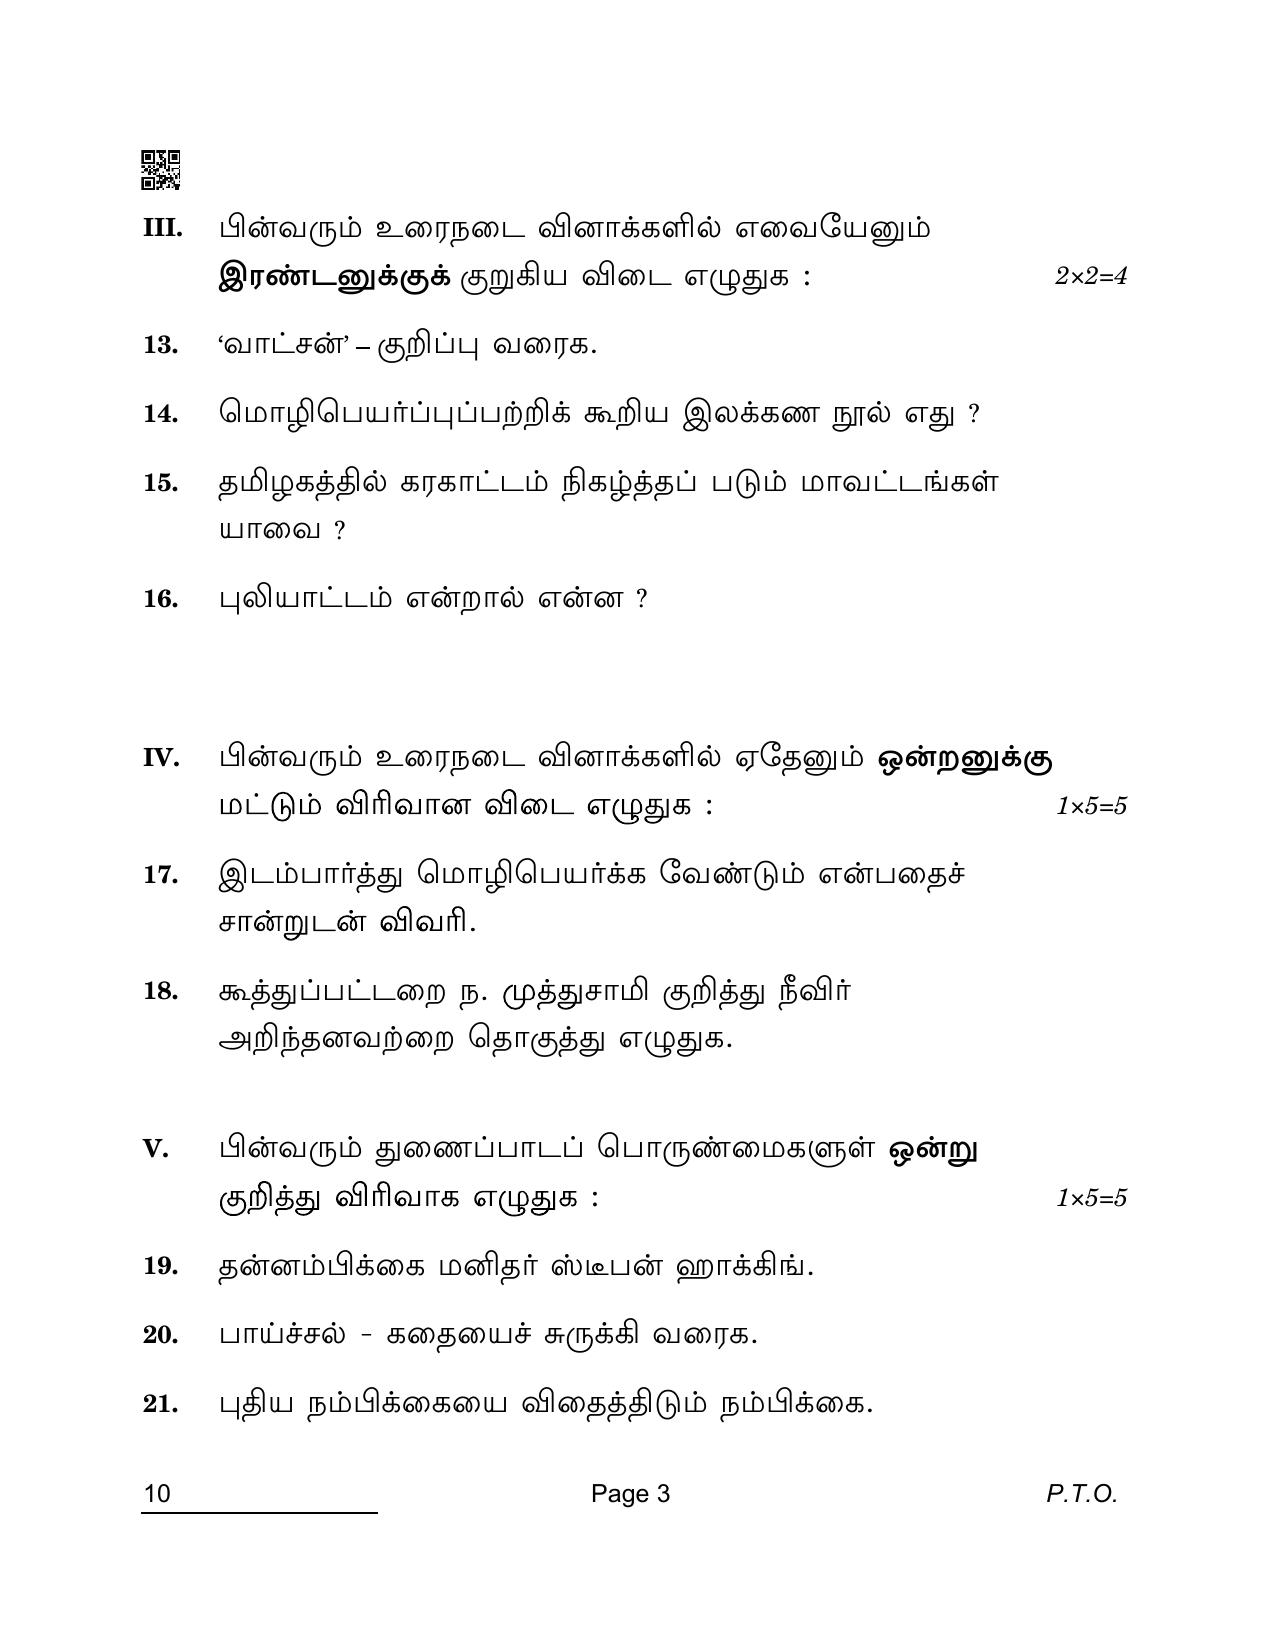 CBSE Class 10 10 Tamil 2022 Compartment Question Paper - Page 3